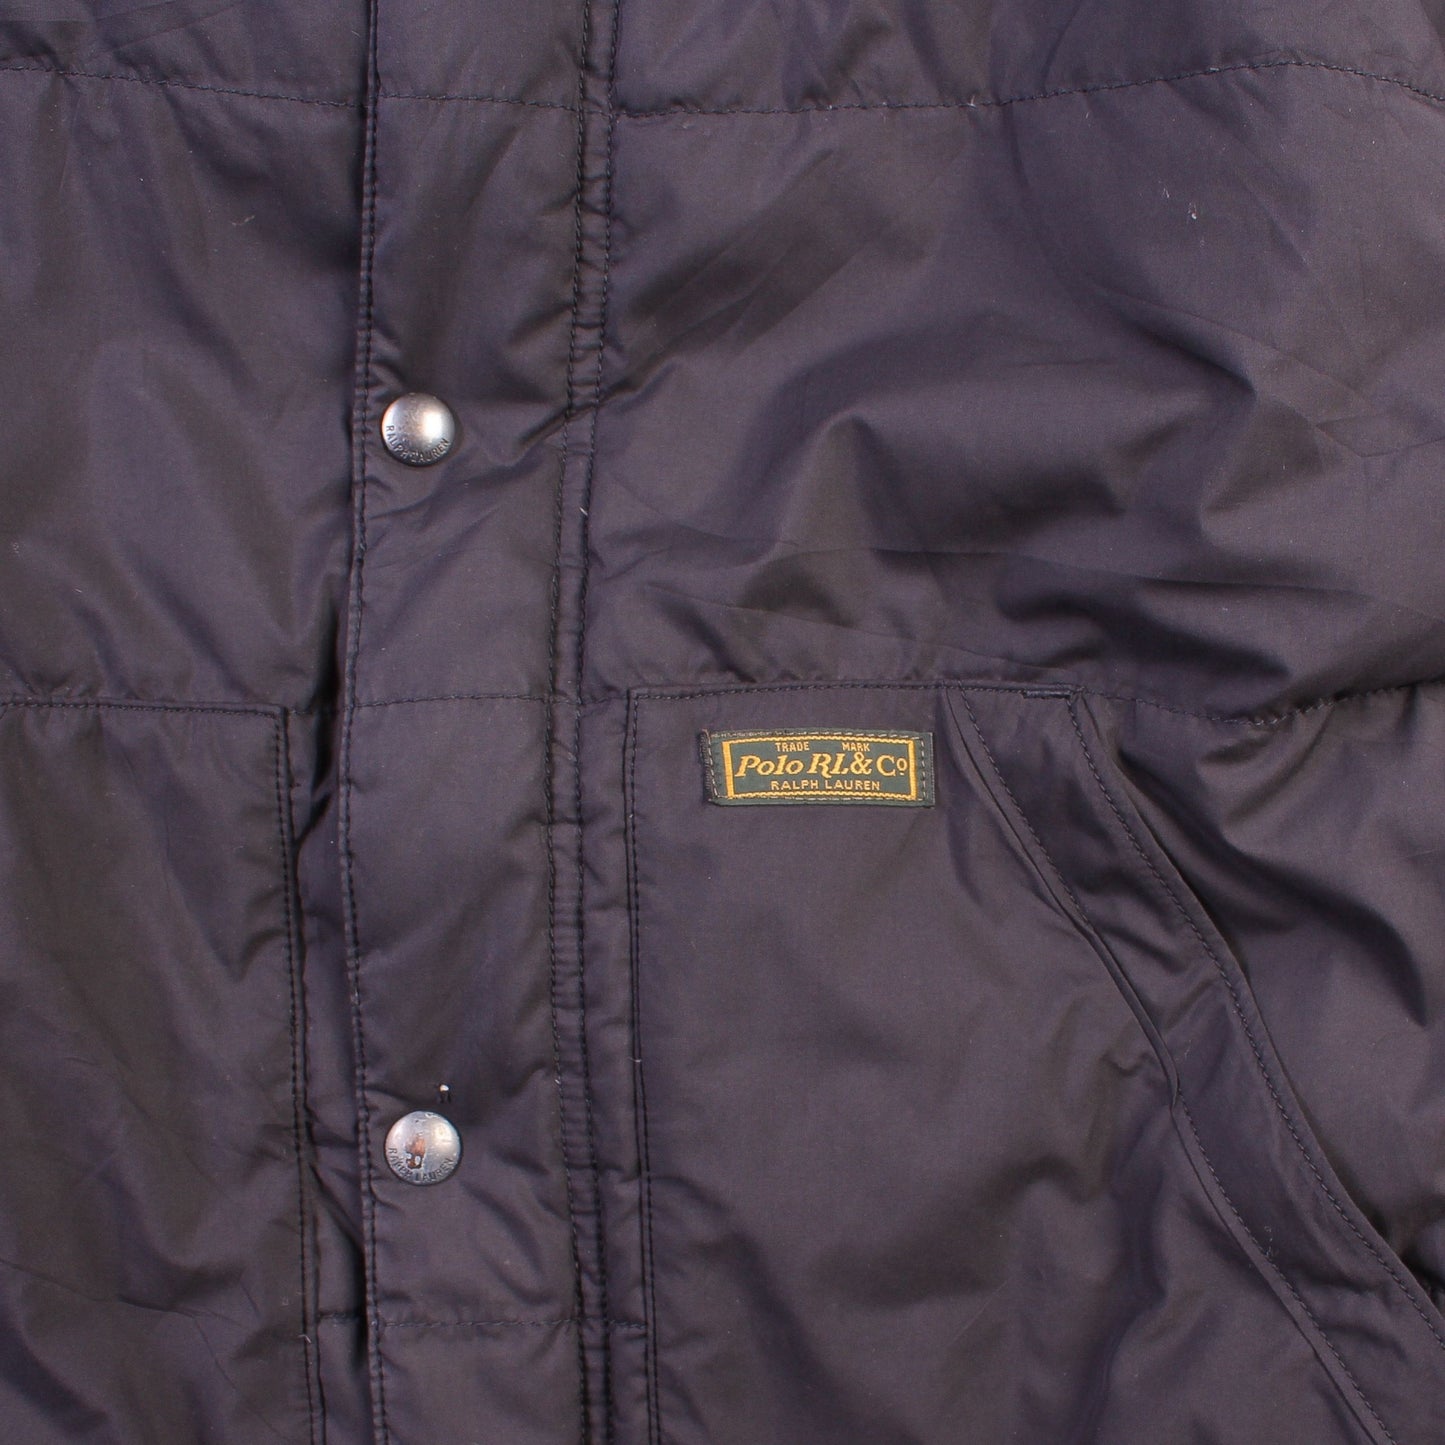 Vintage Puffer Jacket - American Madness